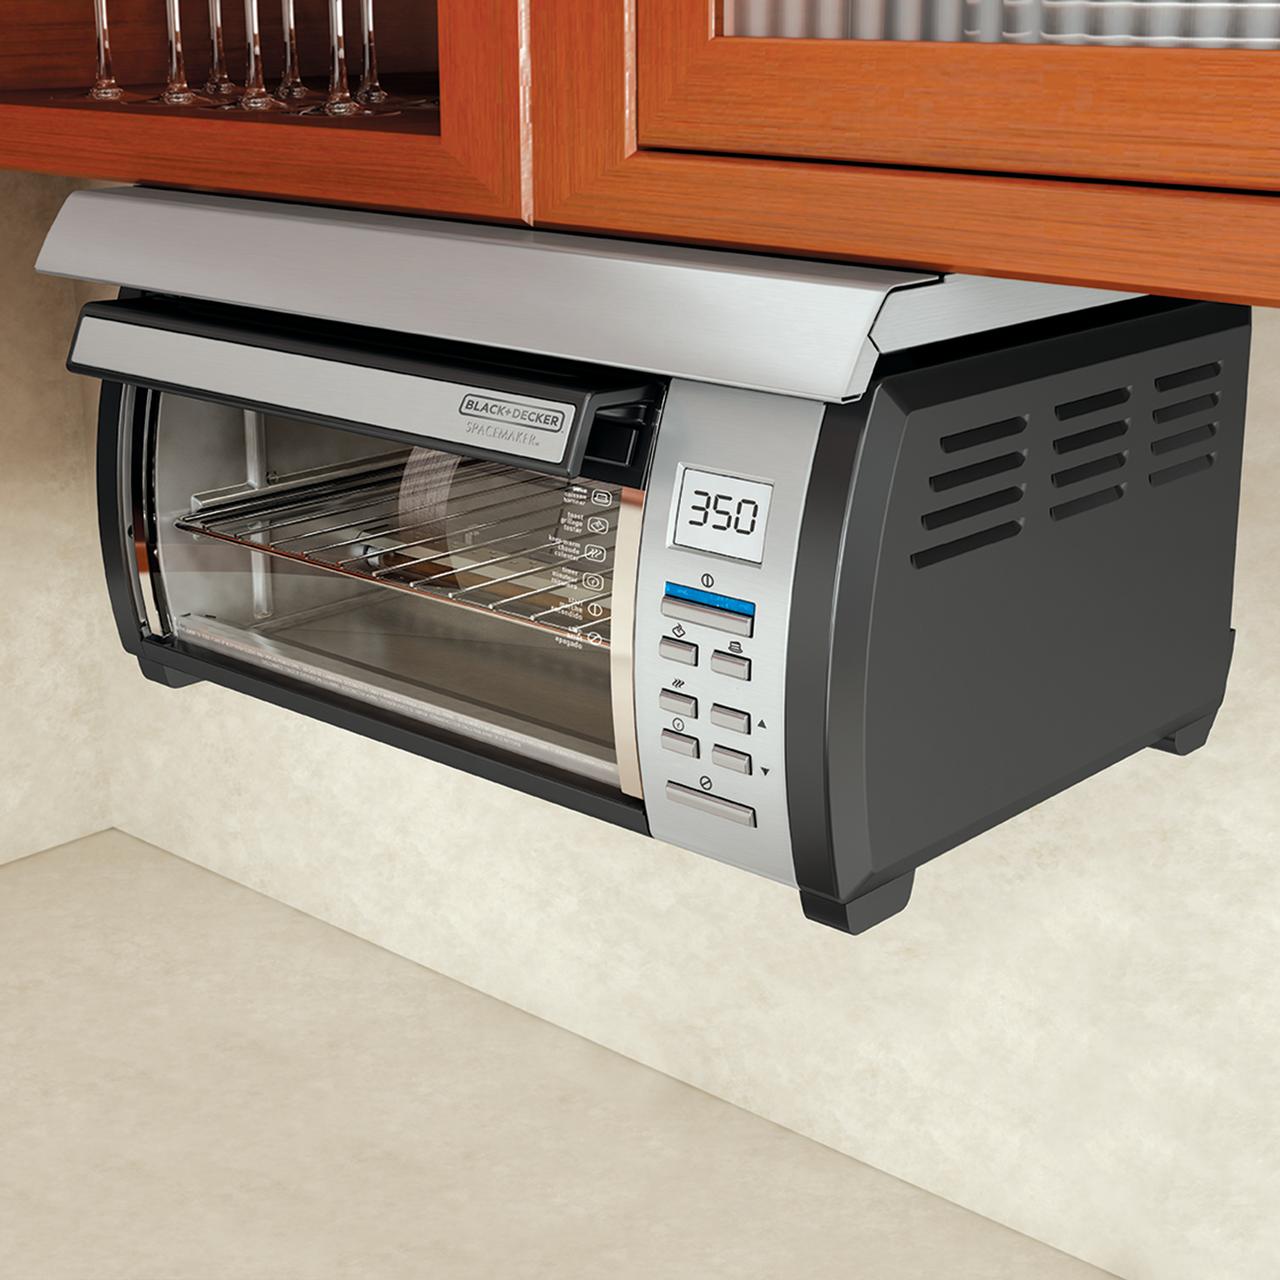 BLACK+DECKER SpaceMaker Under-Counter Toaster Oven, Black/Silver, TROS1000D - image 1 of 10